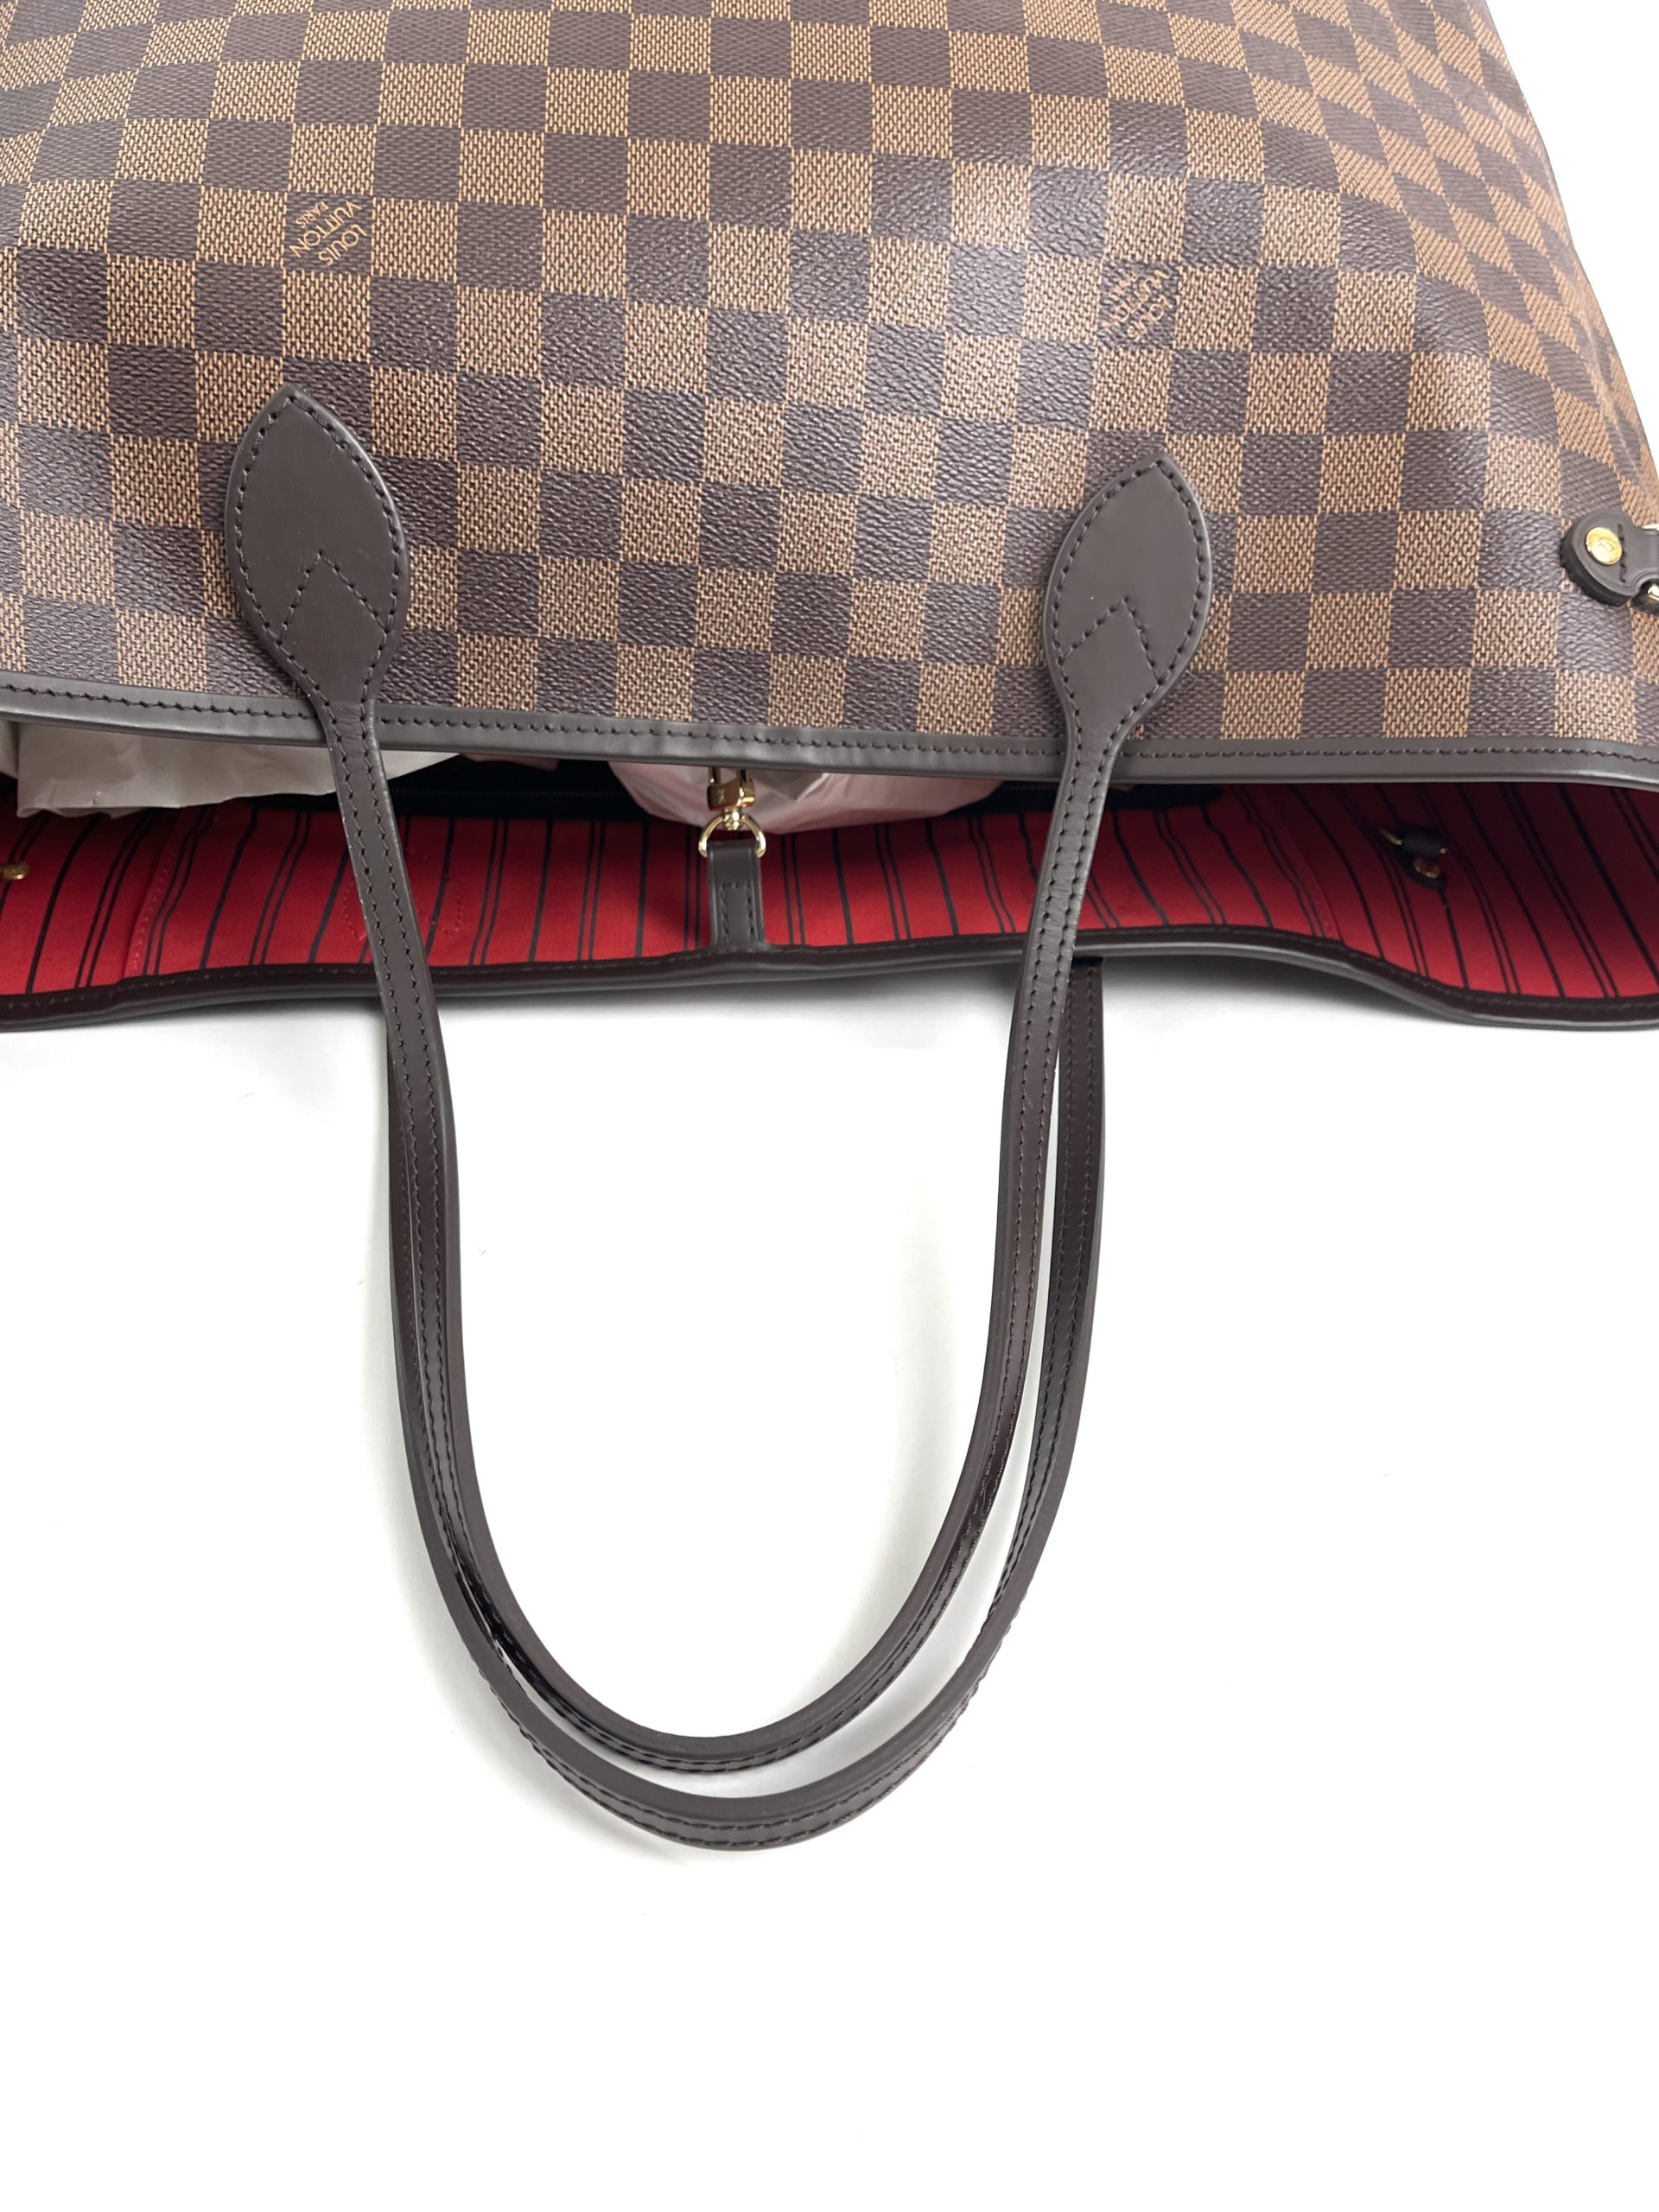 IS THE LOUIS VUITTON NEVERFULL GM WORTH IT IN 2022?